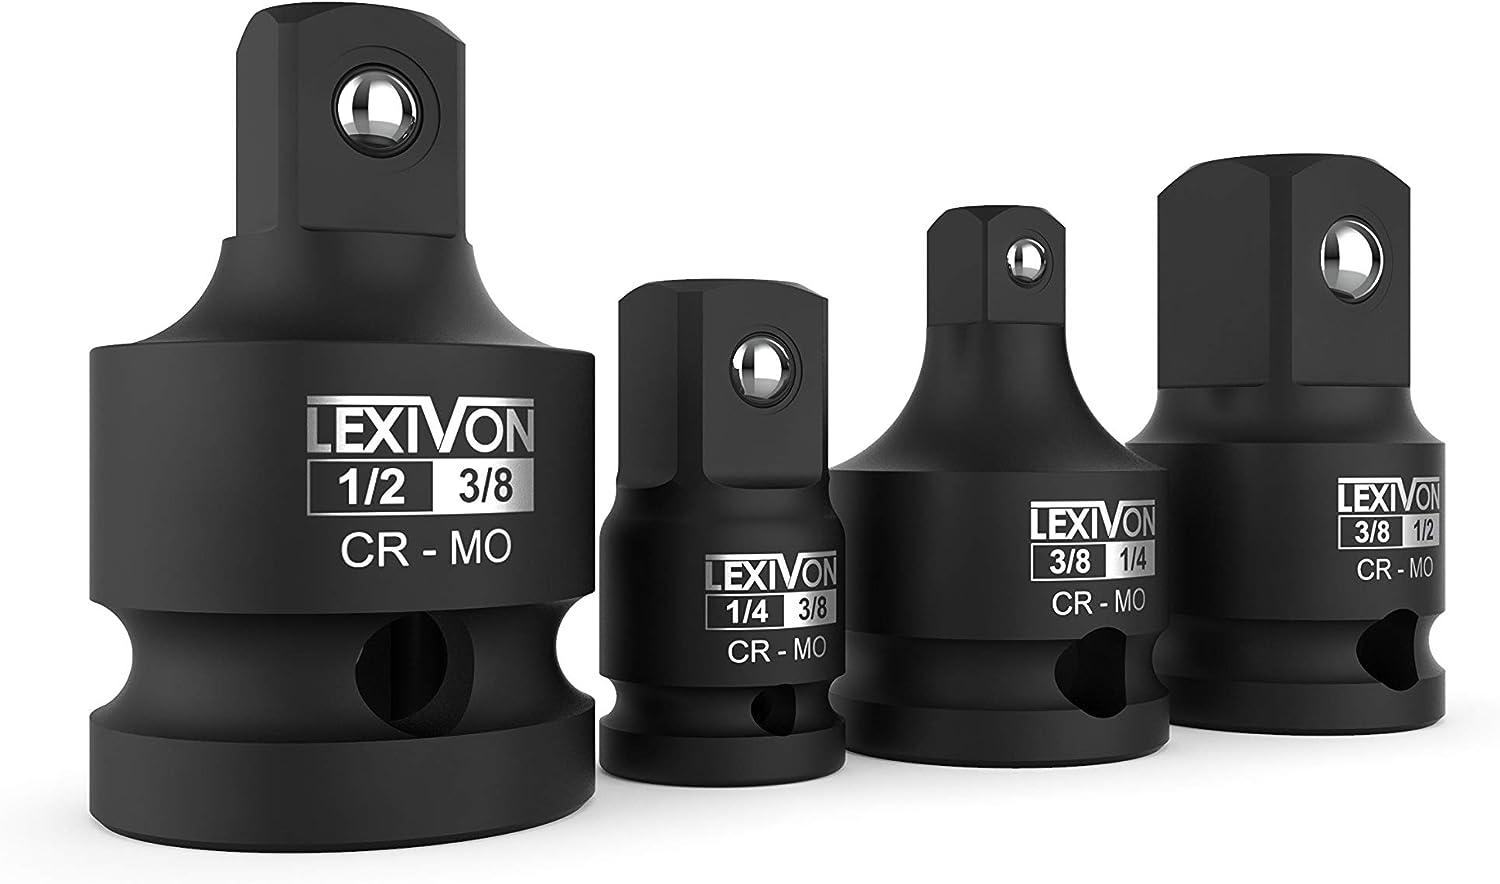 Lexivon Adaptors & Reducers For Impact Sockets, 1/4" 3/8" 1/2" 1/2", Steel Alloy - Set of 4 (LX-112)